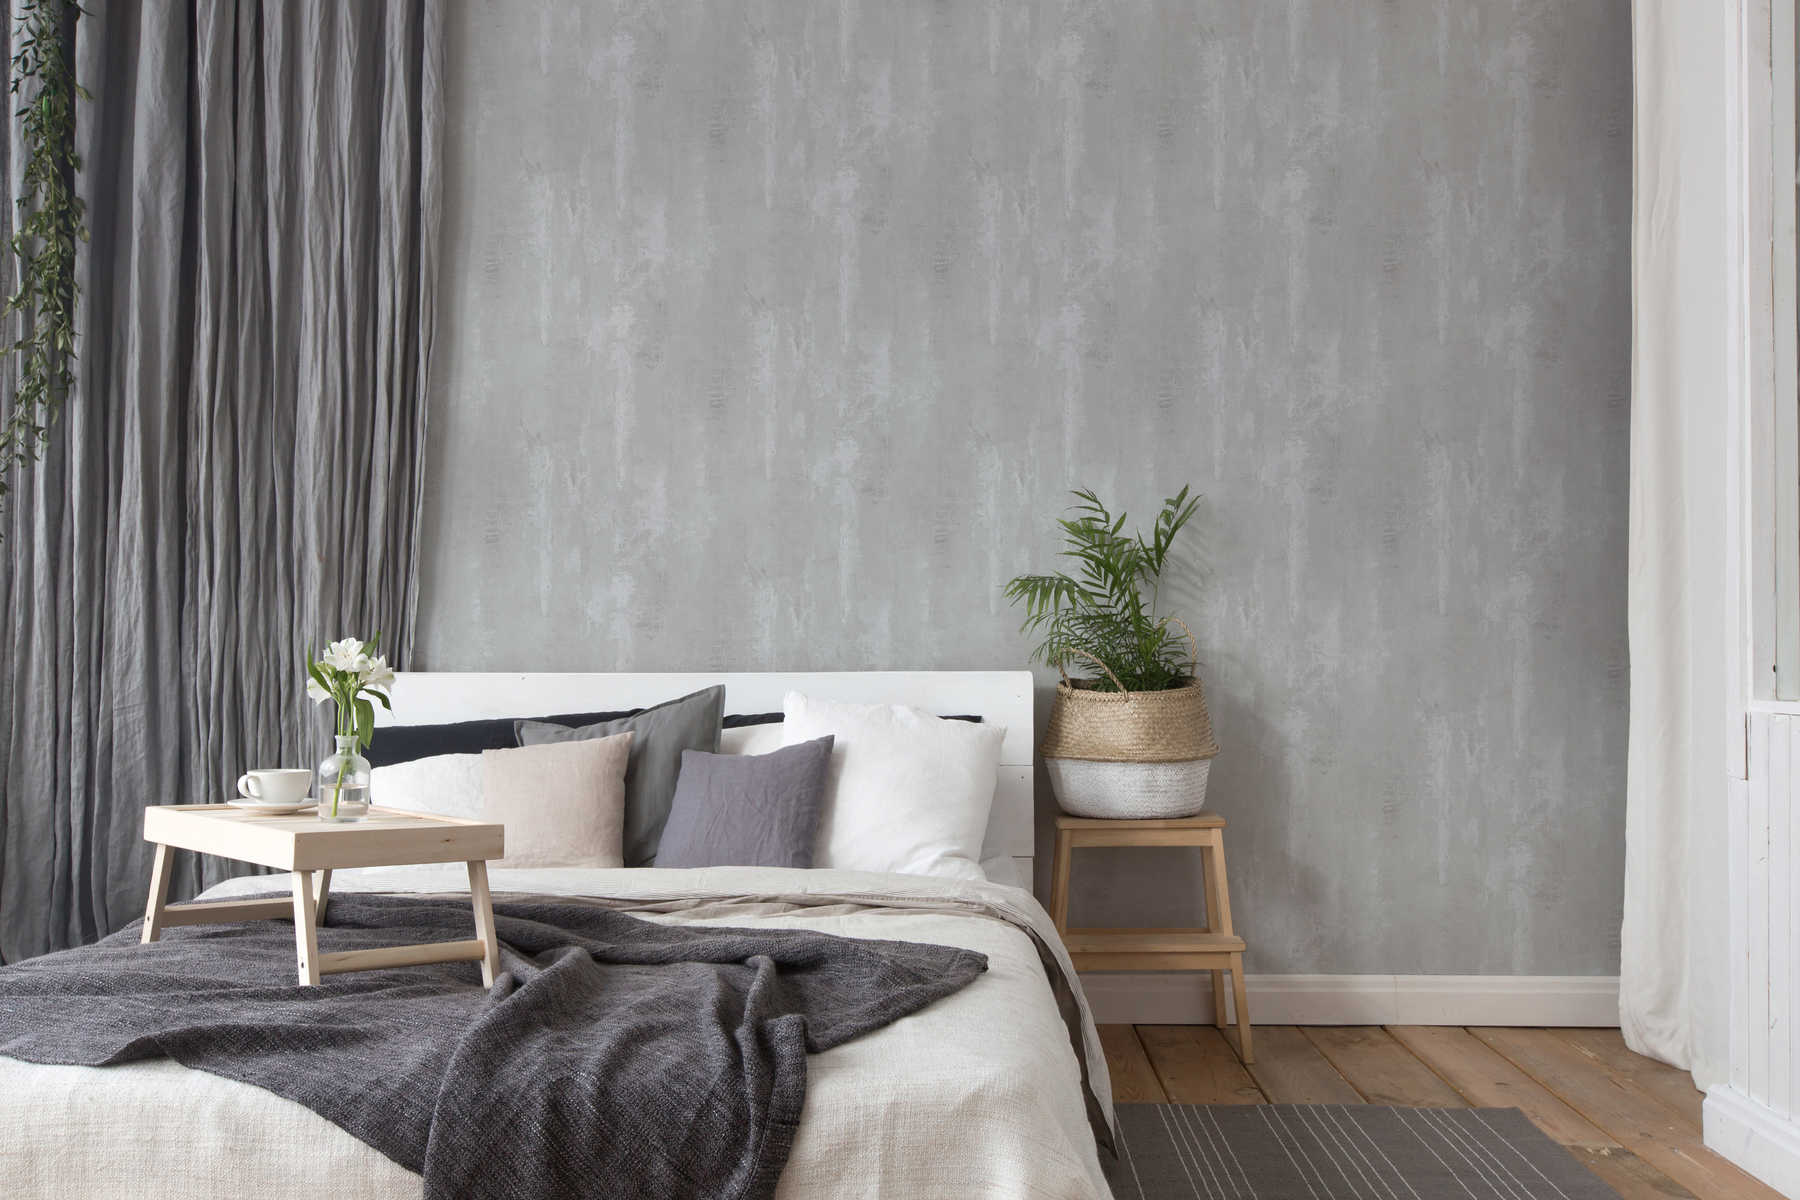             Concrete wallpaper with wiping motif in industrial style - grey
        